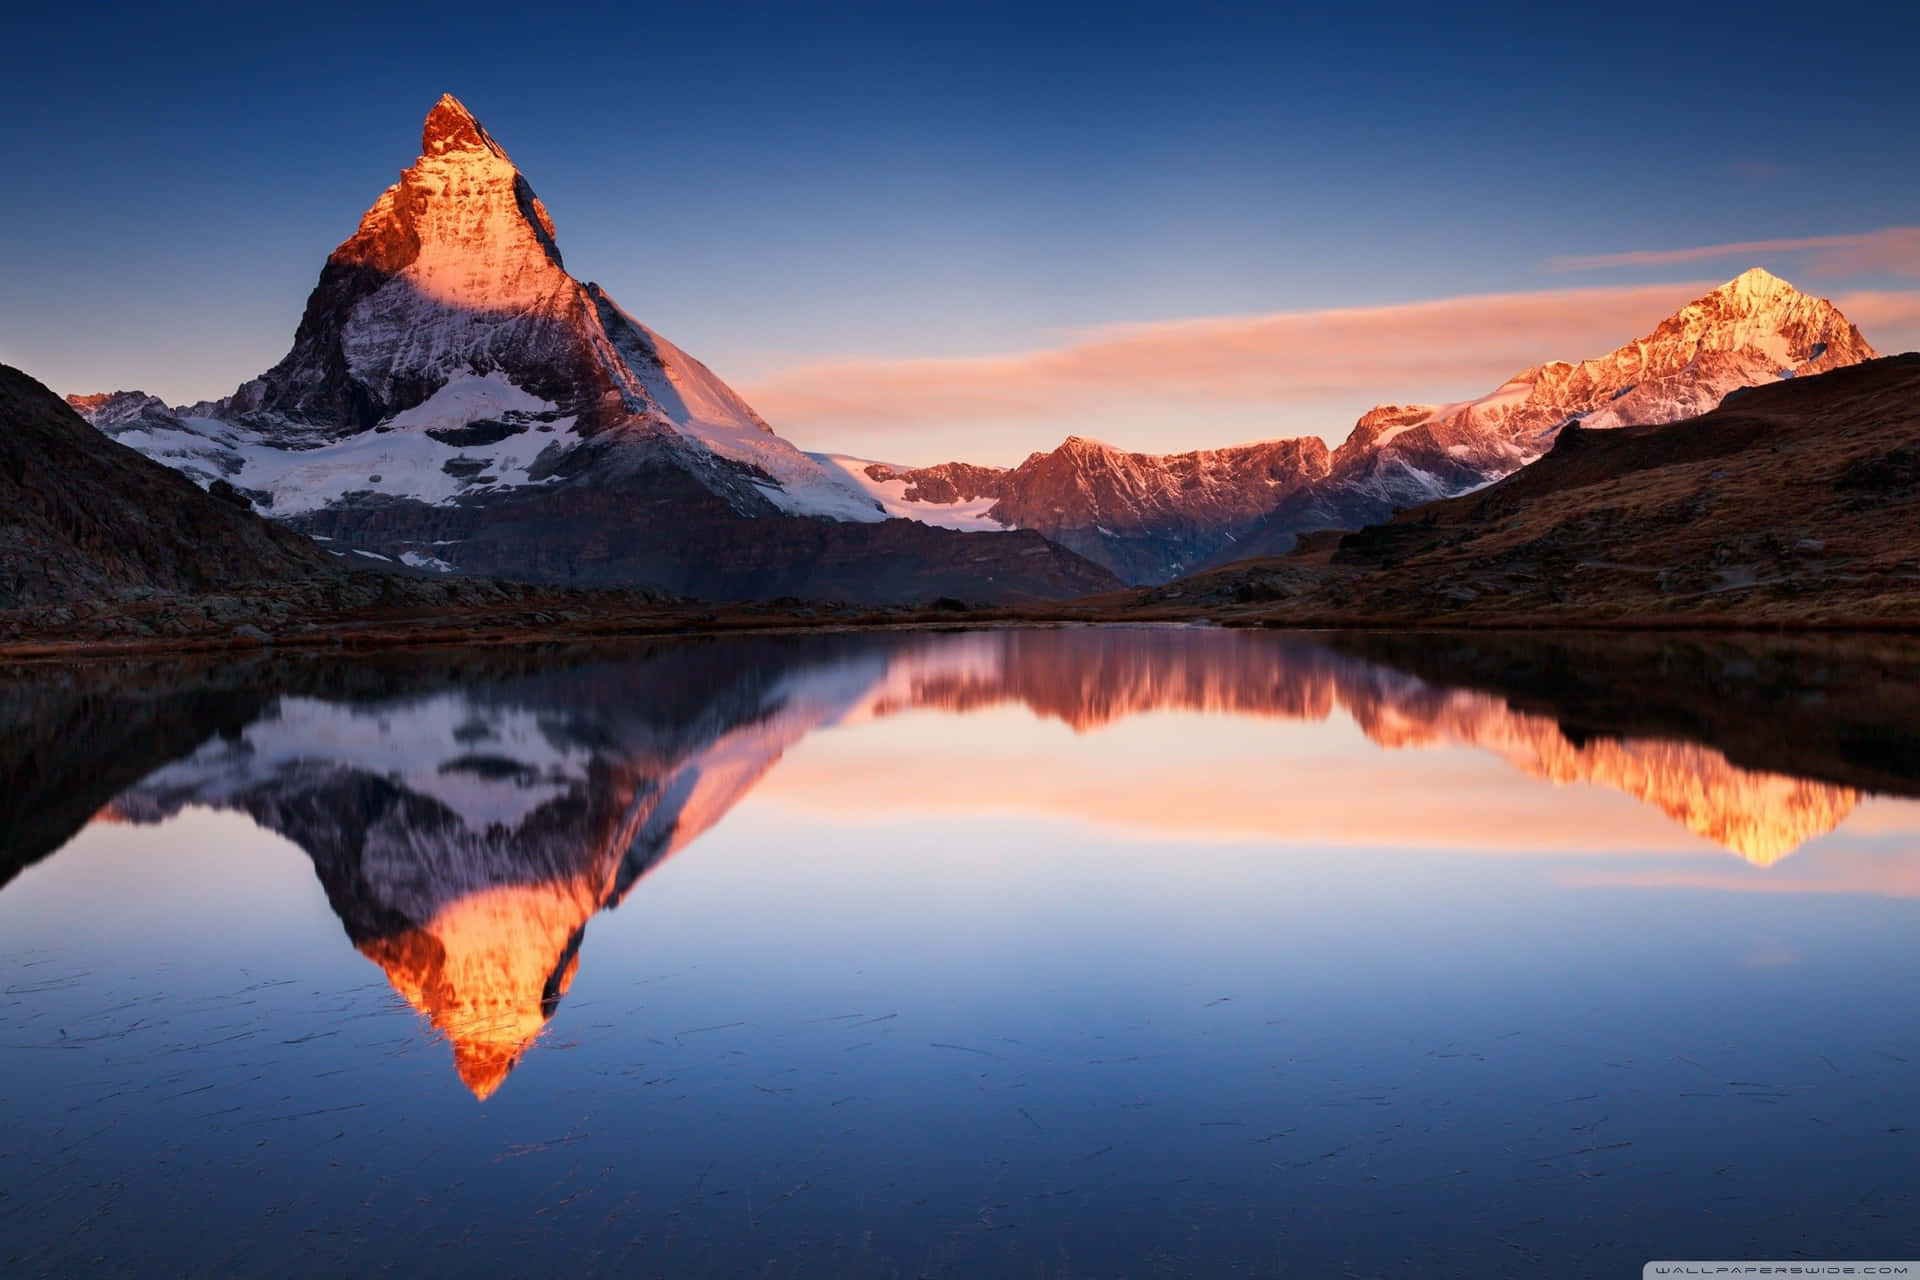 Mountain Reflection On Superficial Lake Water Wallpaper